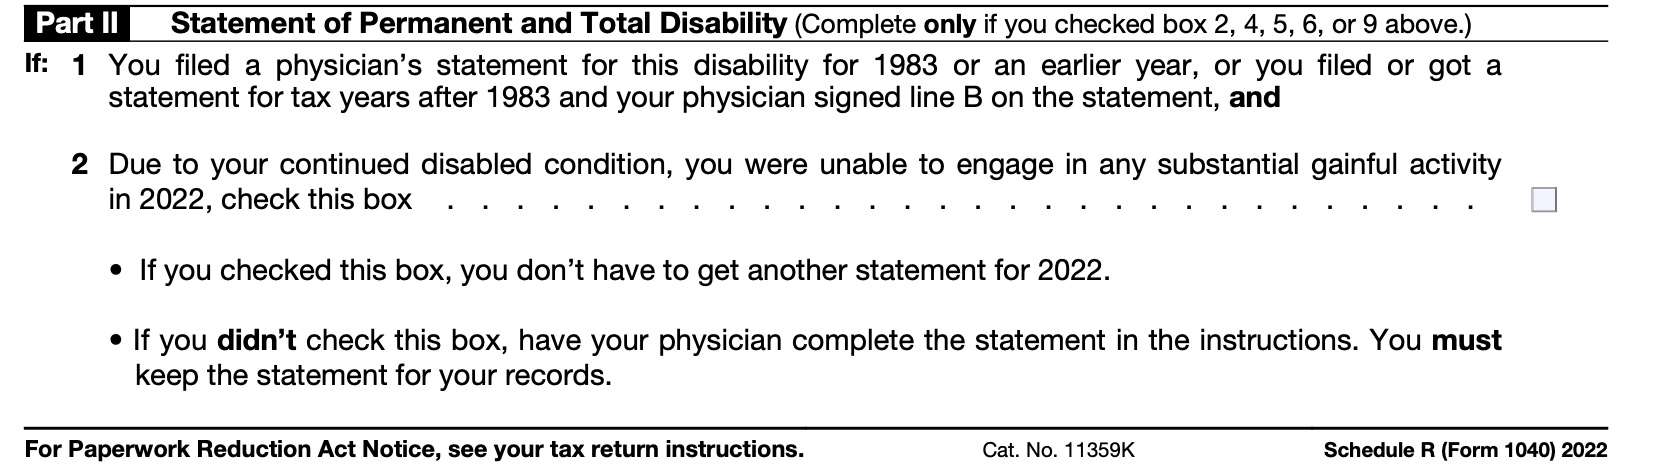 schedule r part ii, statement of permanent and total disability